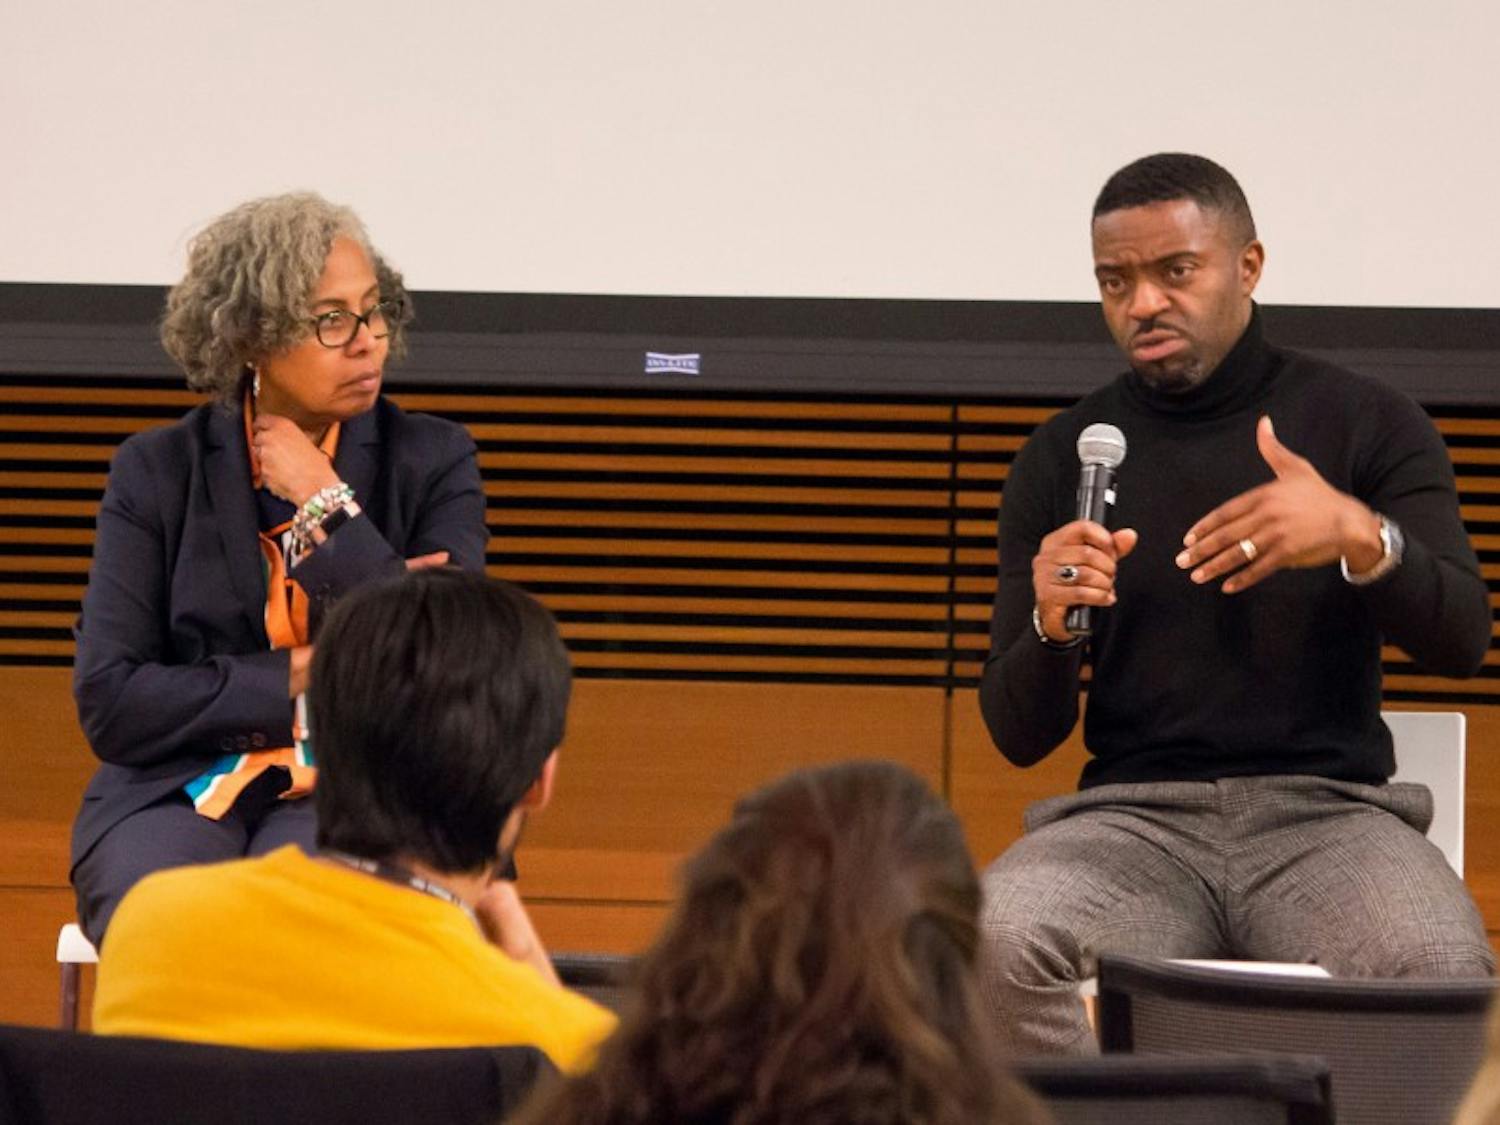 Prominent UW-Madison professors Gloria Ladson-Billings and Faisal Abdu’Allah shared information about education in journalism and art, respectively, as part of the Distinguished Lecture Series Thursday.